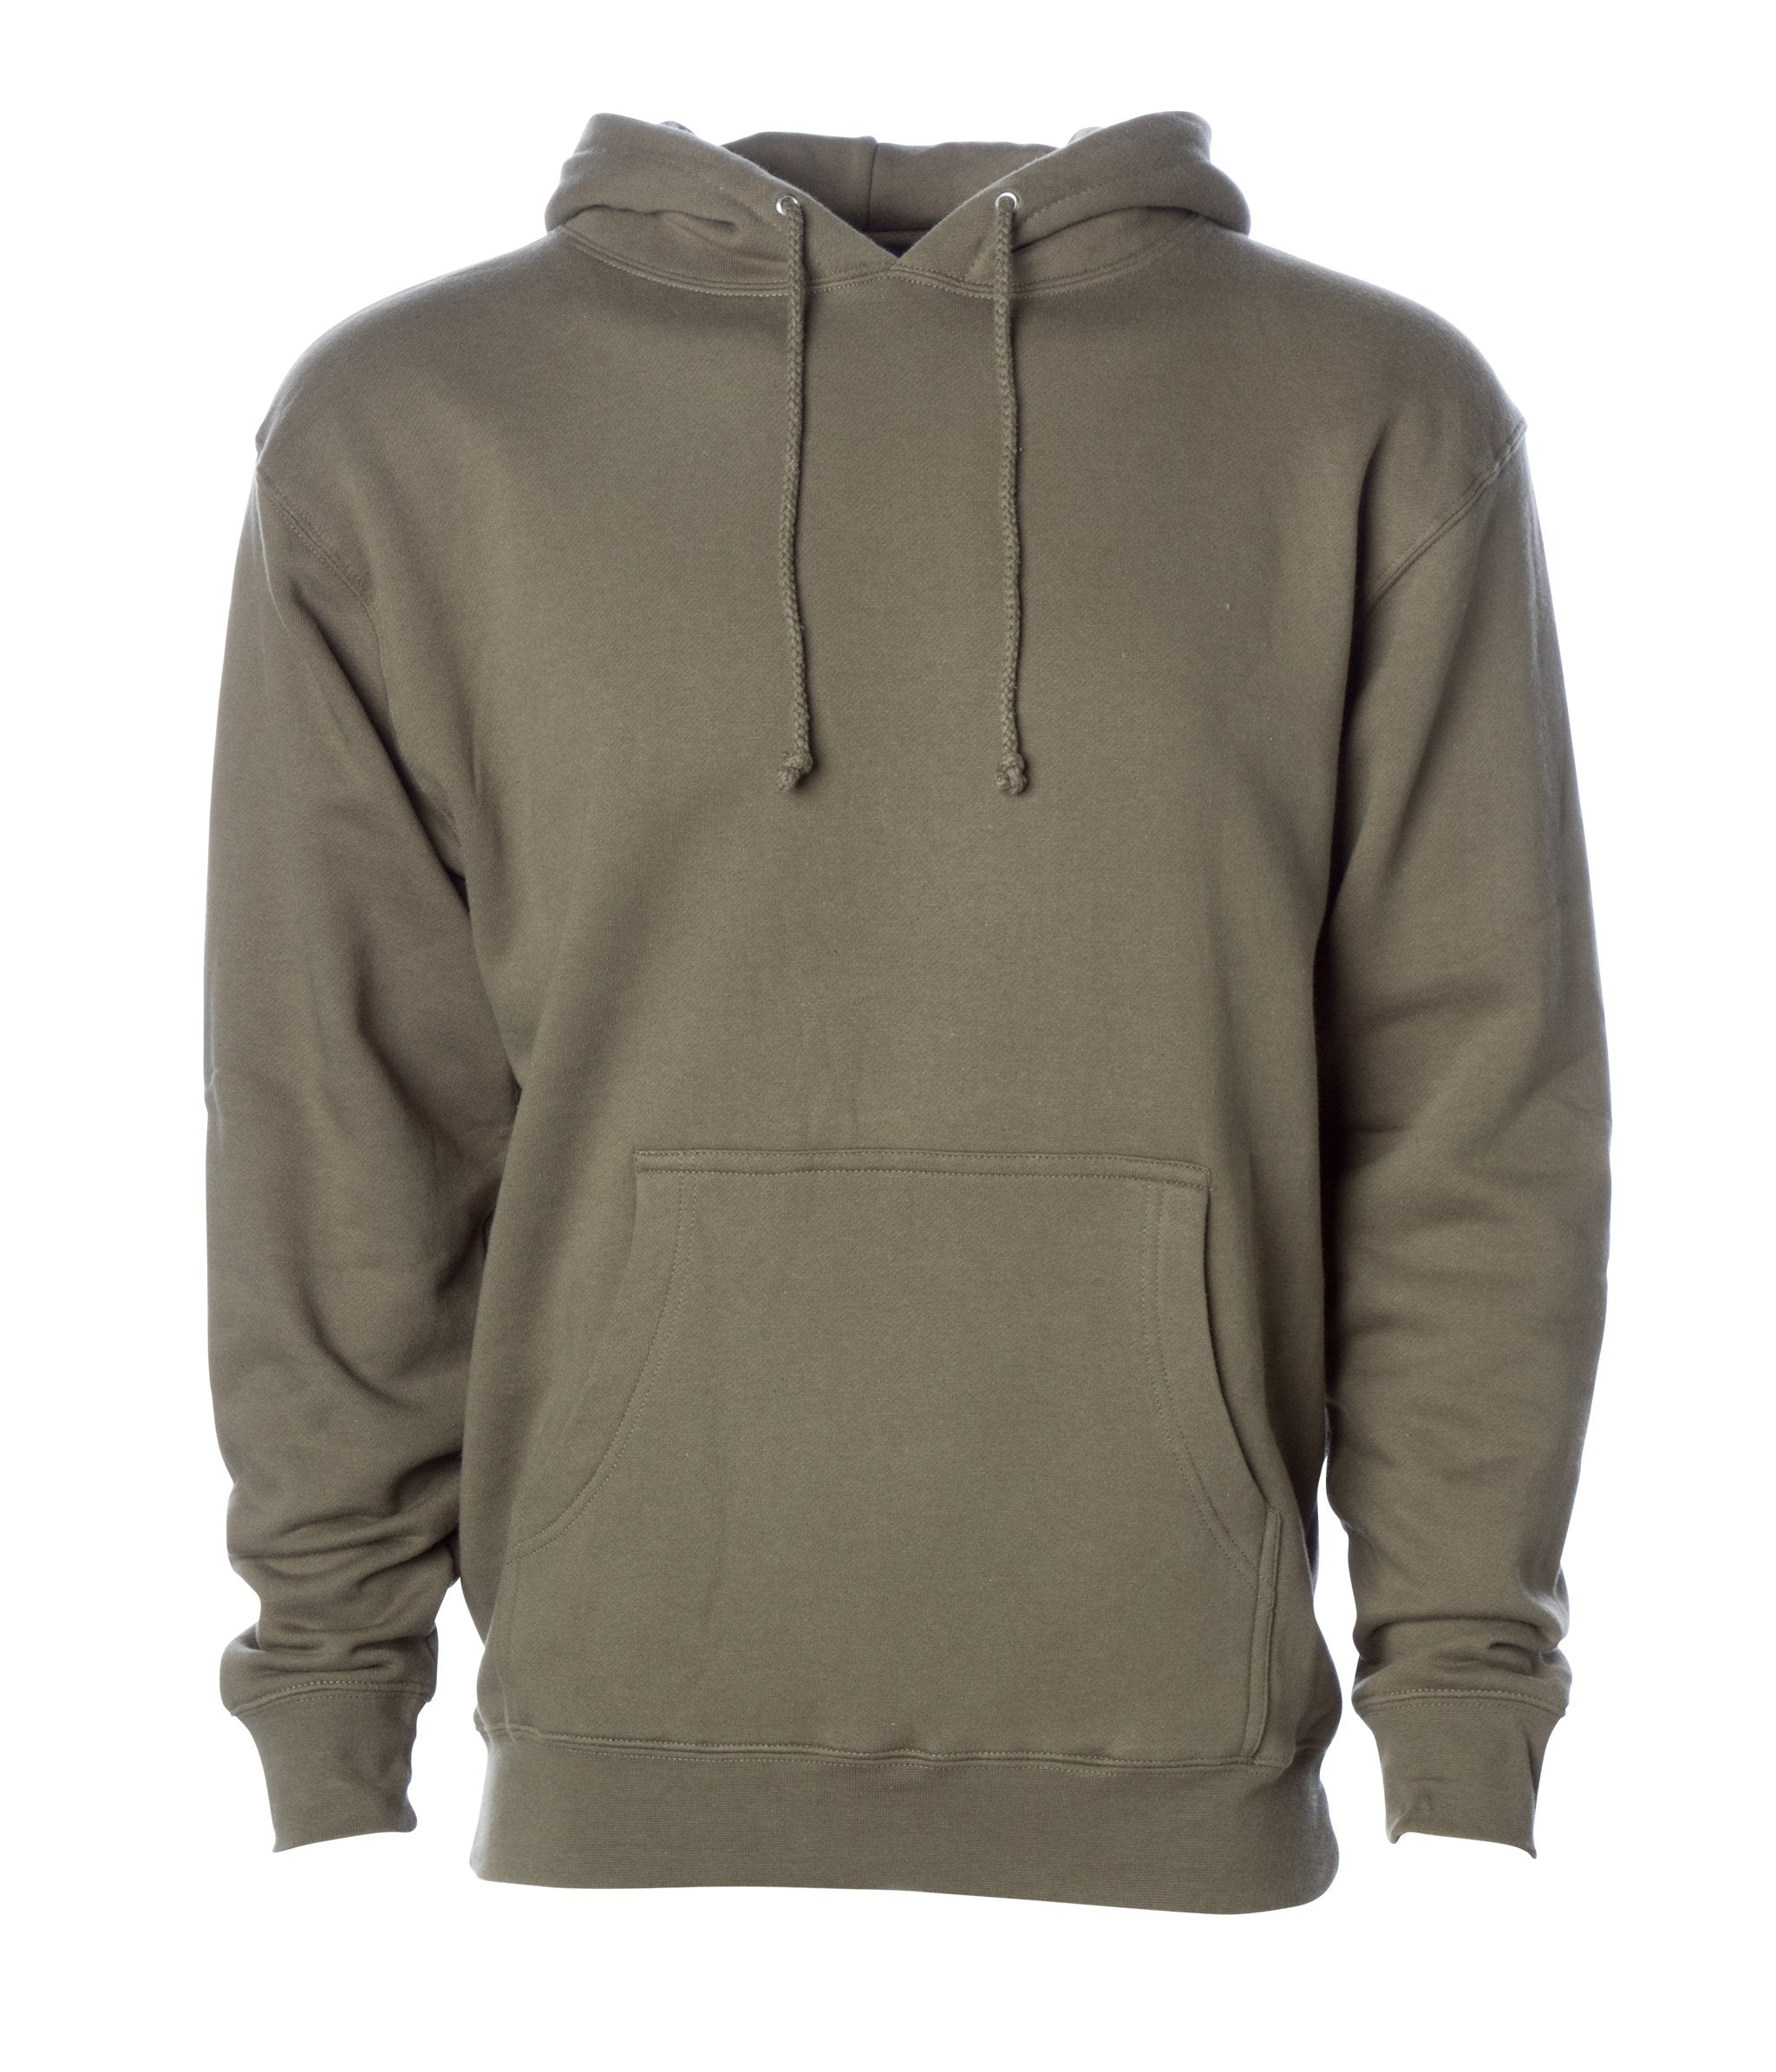 IND4000 Men's Heavyweight Hooded Pullover Sweatshirt in Army